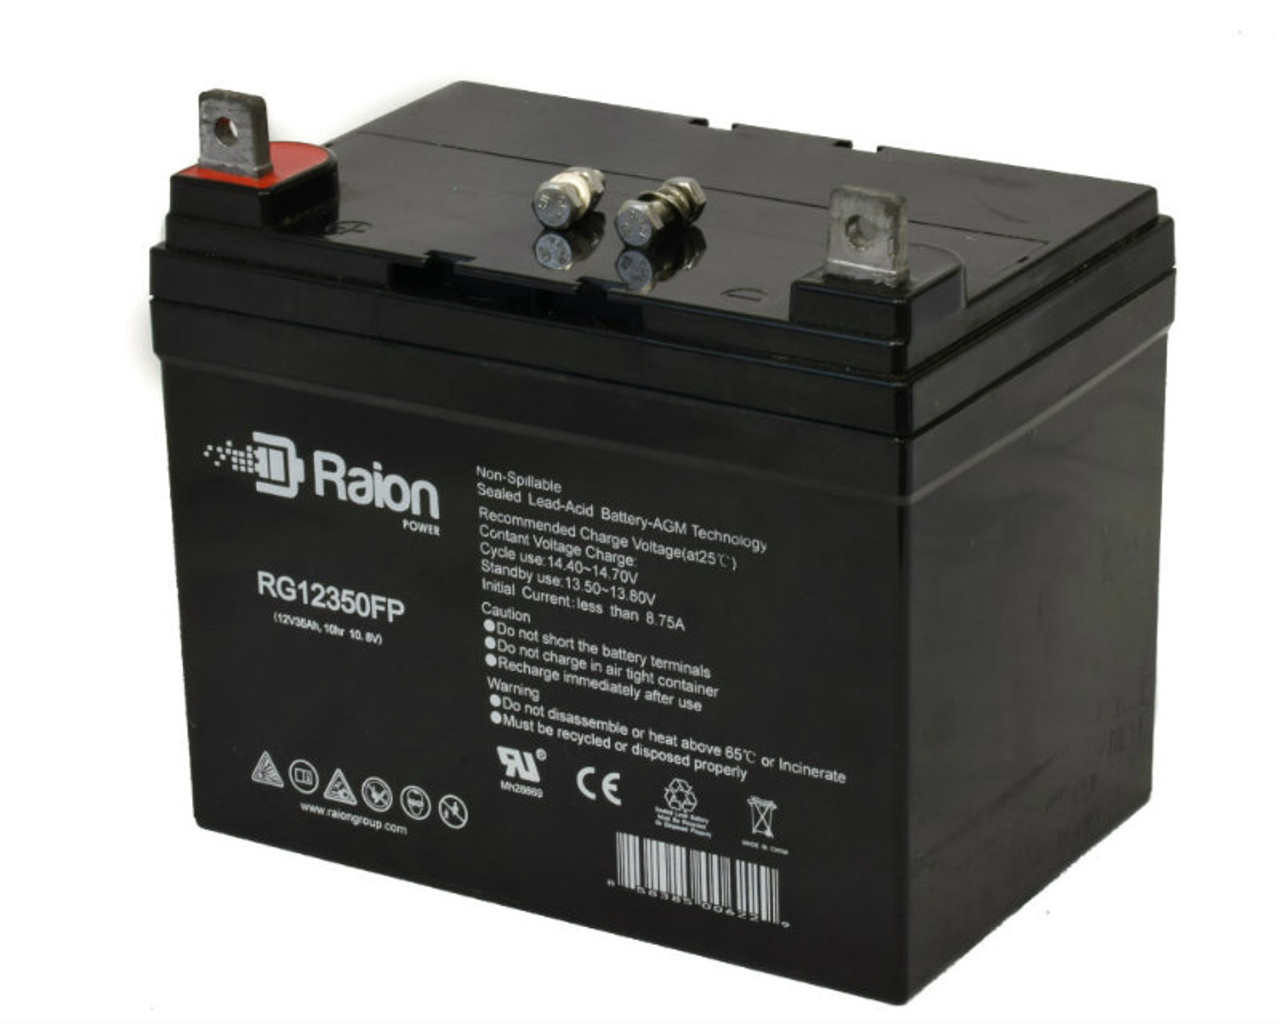 Raion Power Replacement 12V 35Ah Battery for Agco Allis 412H - 1 Pack